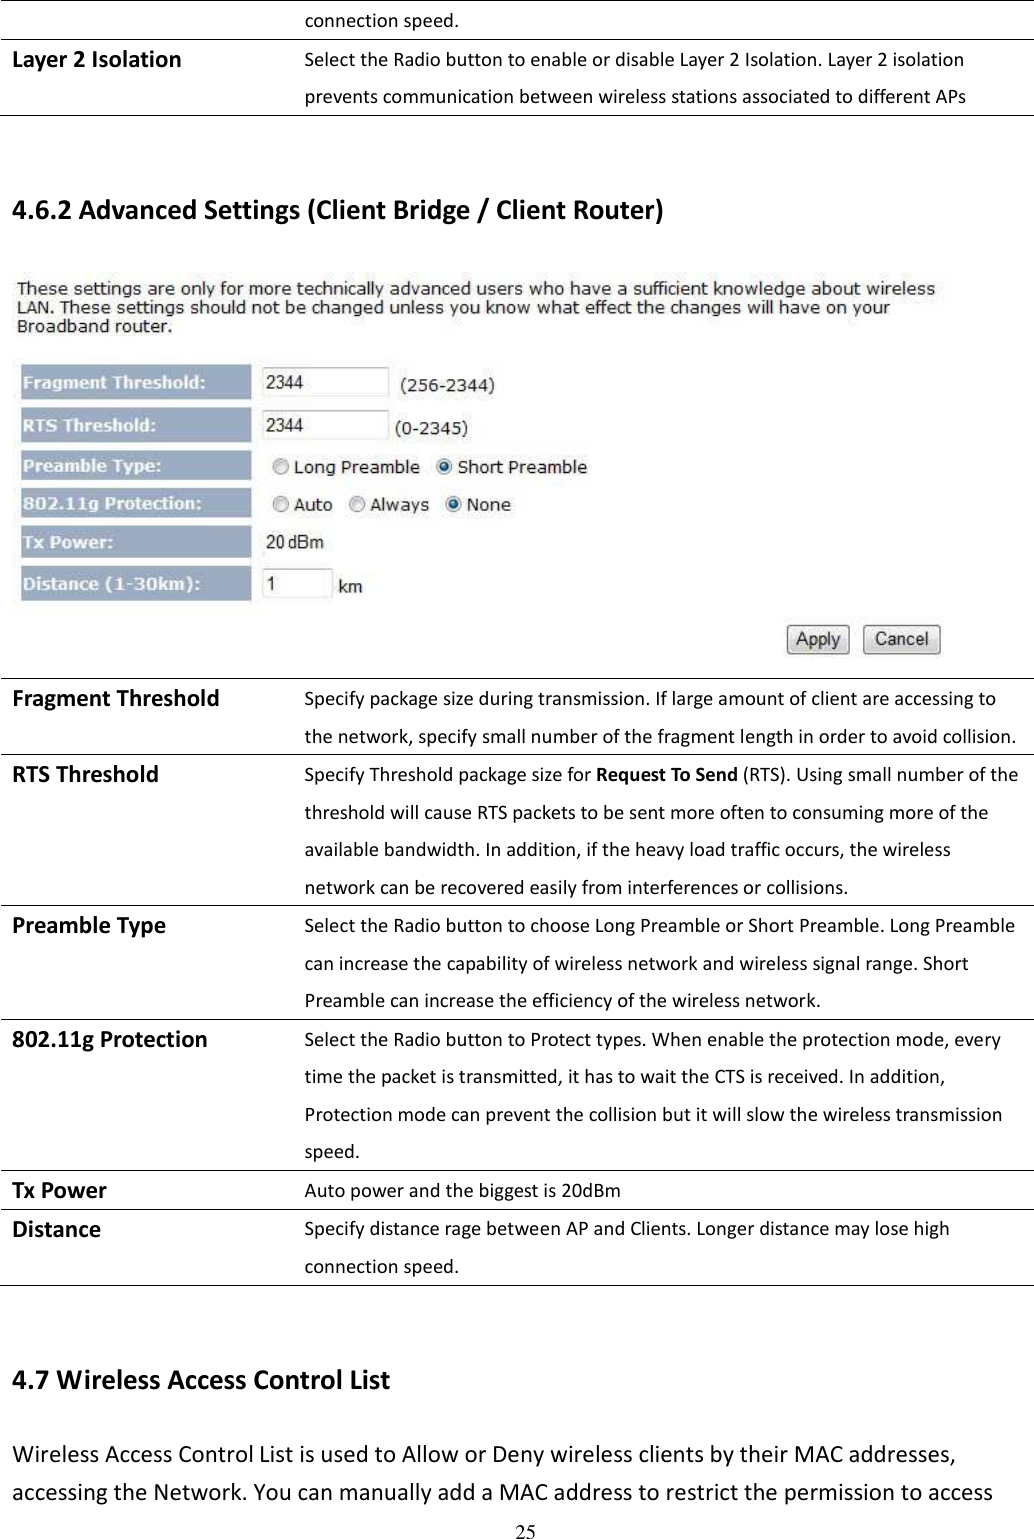 25 connection speed. Layer 2 Isolation Select the Radio button to enable or disable Layer 2 Isolation. Layer 2 isolation prevents communication between wireless stations associated to different APs  4.6.2 Advanced Settings (Client Bridge / Client Router)  Fragment Threshold Specify package size during transmission. If large amount of client are accessing to the network, specify small number of the fragment length in order to avoid collision. RTS Threshold Specify Threshold package size for Request To Send (RTS). Using small number of the threshold will cause RTS packets to be sent more often to consuming more of the available bandwidth. In addition, if the heavy load traffic occurs, the wireless network can be recovered easily from interferences or collisions. Preamble Type Select the Radio button to choose Long Preamble or Short Preamble. Long Preamble can increase the capability of wireless network and wireless signal range. Short Preamble can increase the efficiency of the wireless network. 802.11g Protection Select the Radio button to Protect types. When enable the protection mode, every time the packet is transmitted, it has to wait the CTS is received. In addition, Protection mode can prevent the collision but it will slow the wireless transmission speed. Tx Power Auto power and the biggest is 20dBm Distance Specify distance rage between AP and Clients. Longer distance may lose high connection speed.  4.7 Wireless Access Control List Wireless Access Control List is used to Allow or Deny wireless clients by their MAC addresses, accessing the Network. You can manually add a MAC address to restrict the permission to access 